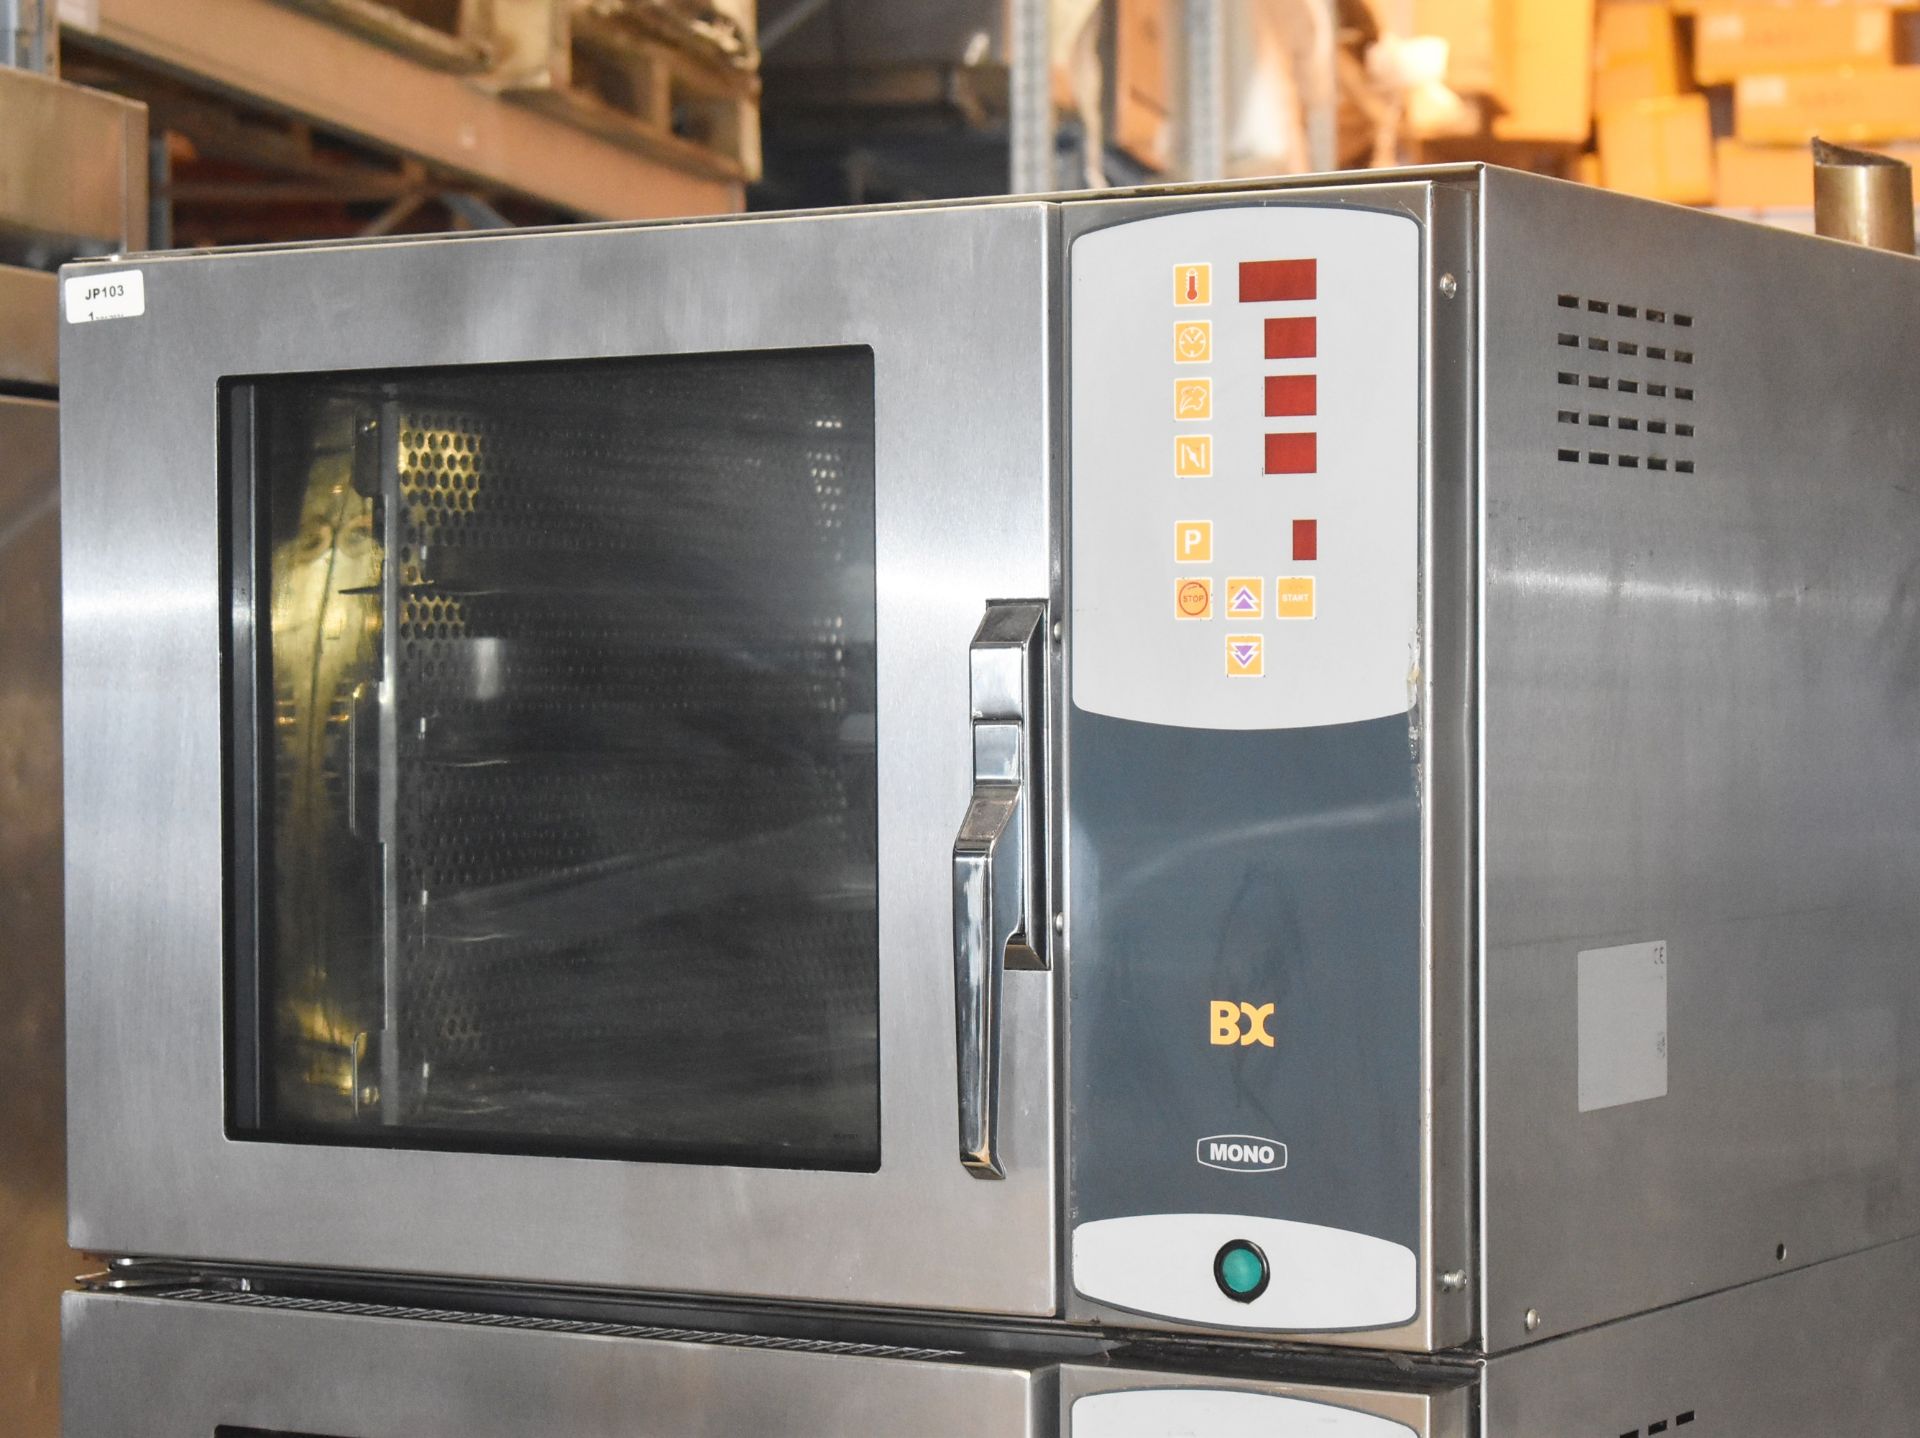 1 x Mono BX Bake Off Double Convection Steam Oven With Stainless Steel Exterior and Stand - Recently - Image 7 of 8